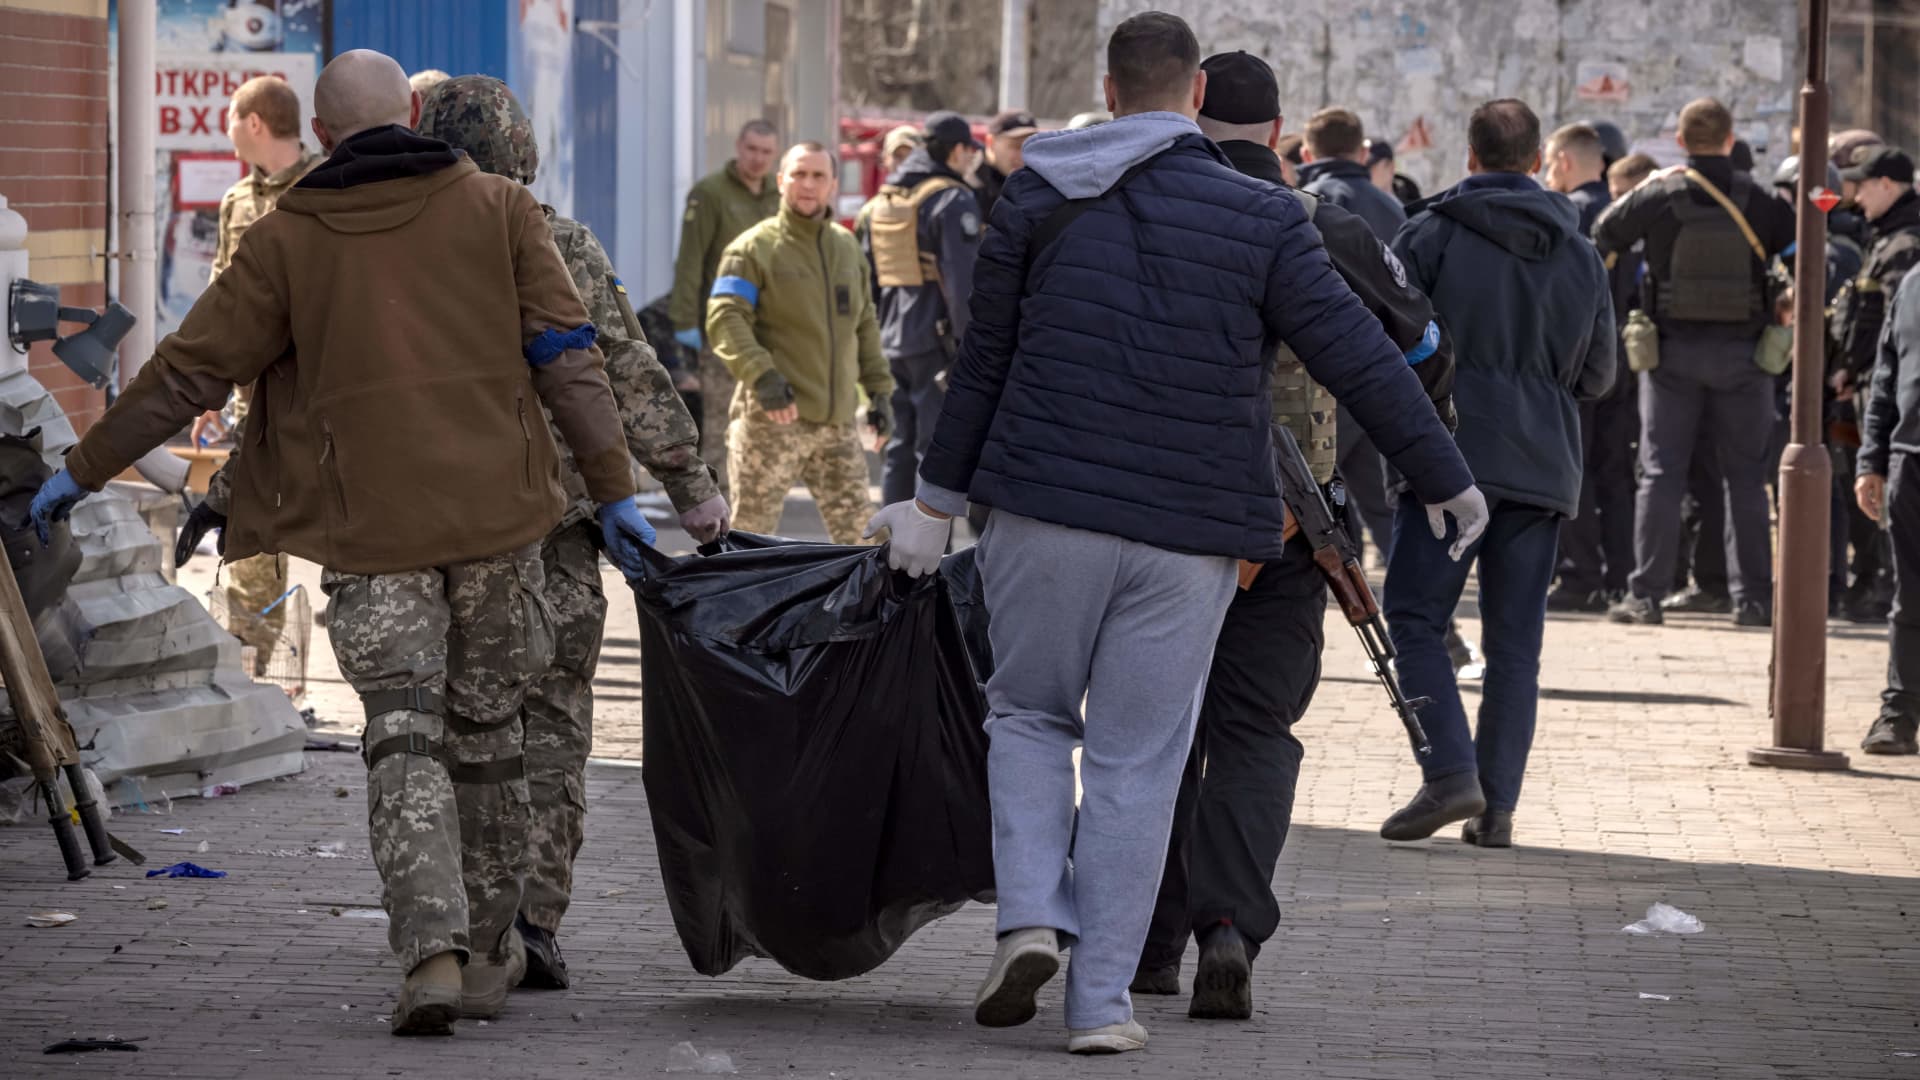 EDITORS NOTE: Graphic content / Ukrainian soldiers clear out bodies after a rocket attack killed at least 35 people on April 8, 2022 at a train station in Kramatorsk, eastern Ukraine, that was being used for civilian evacuations.